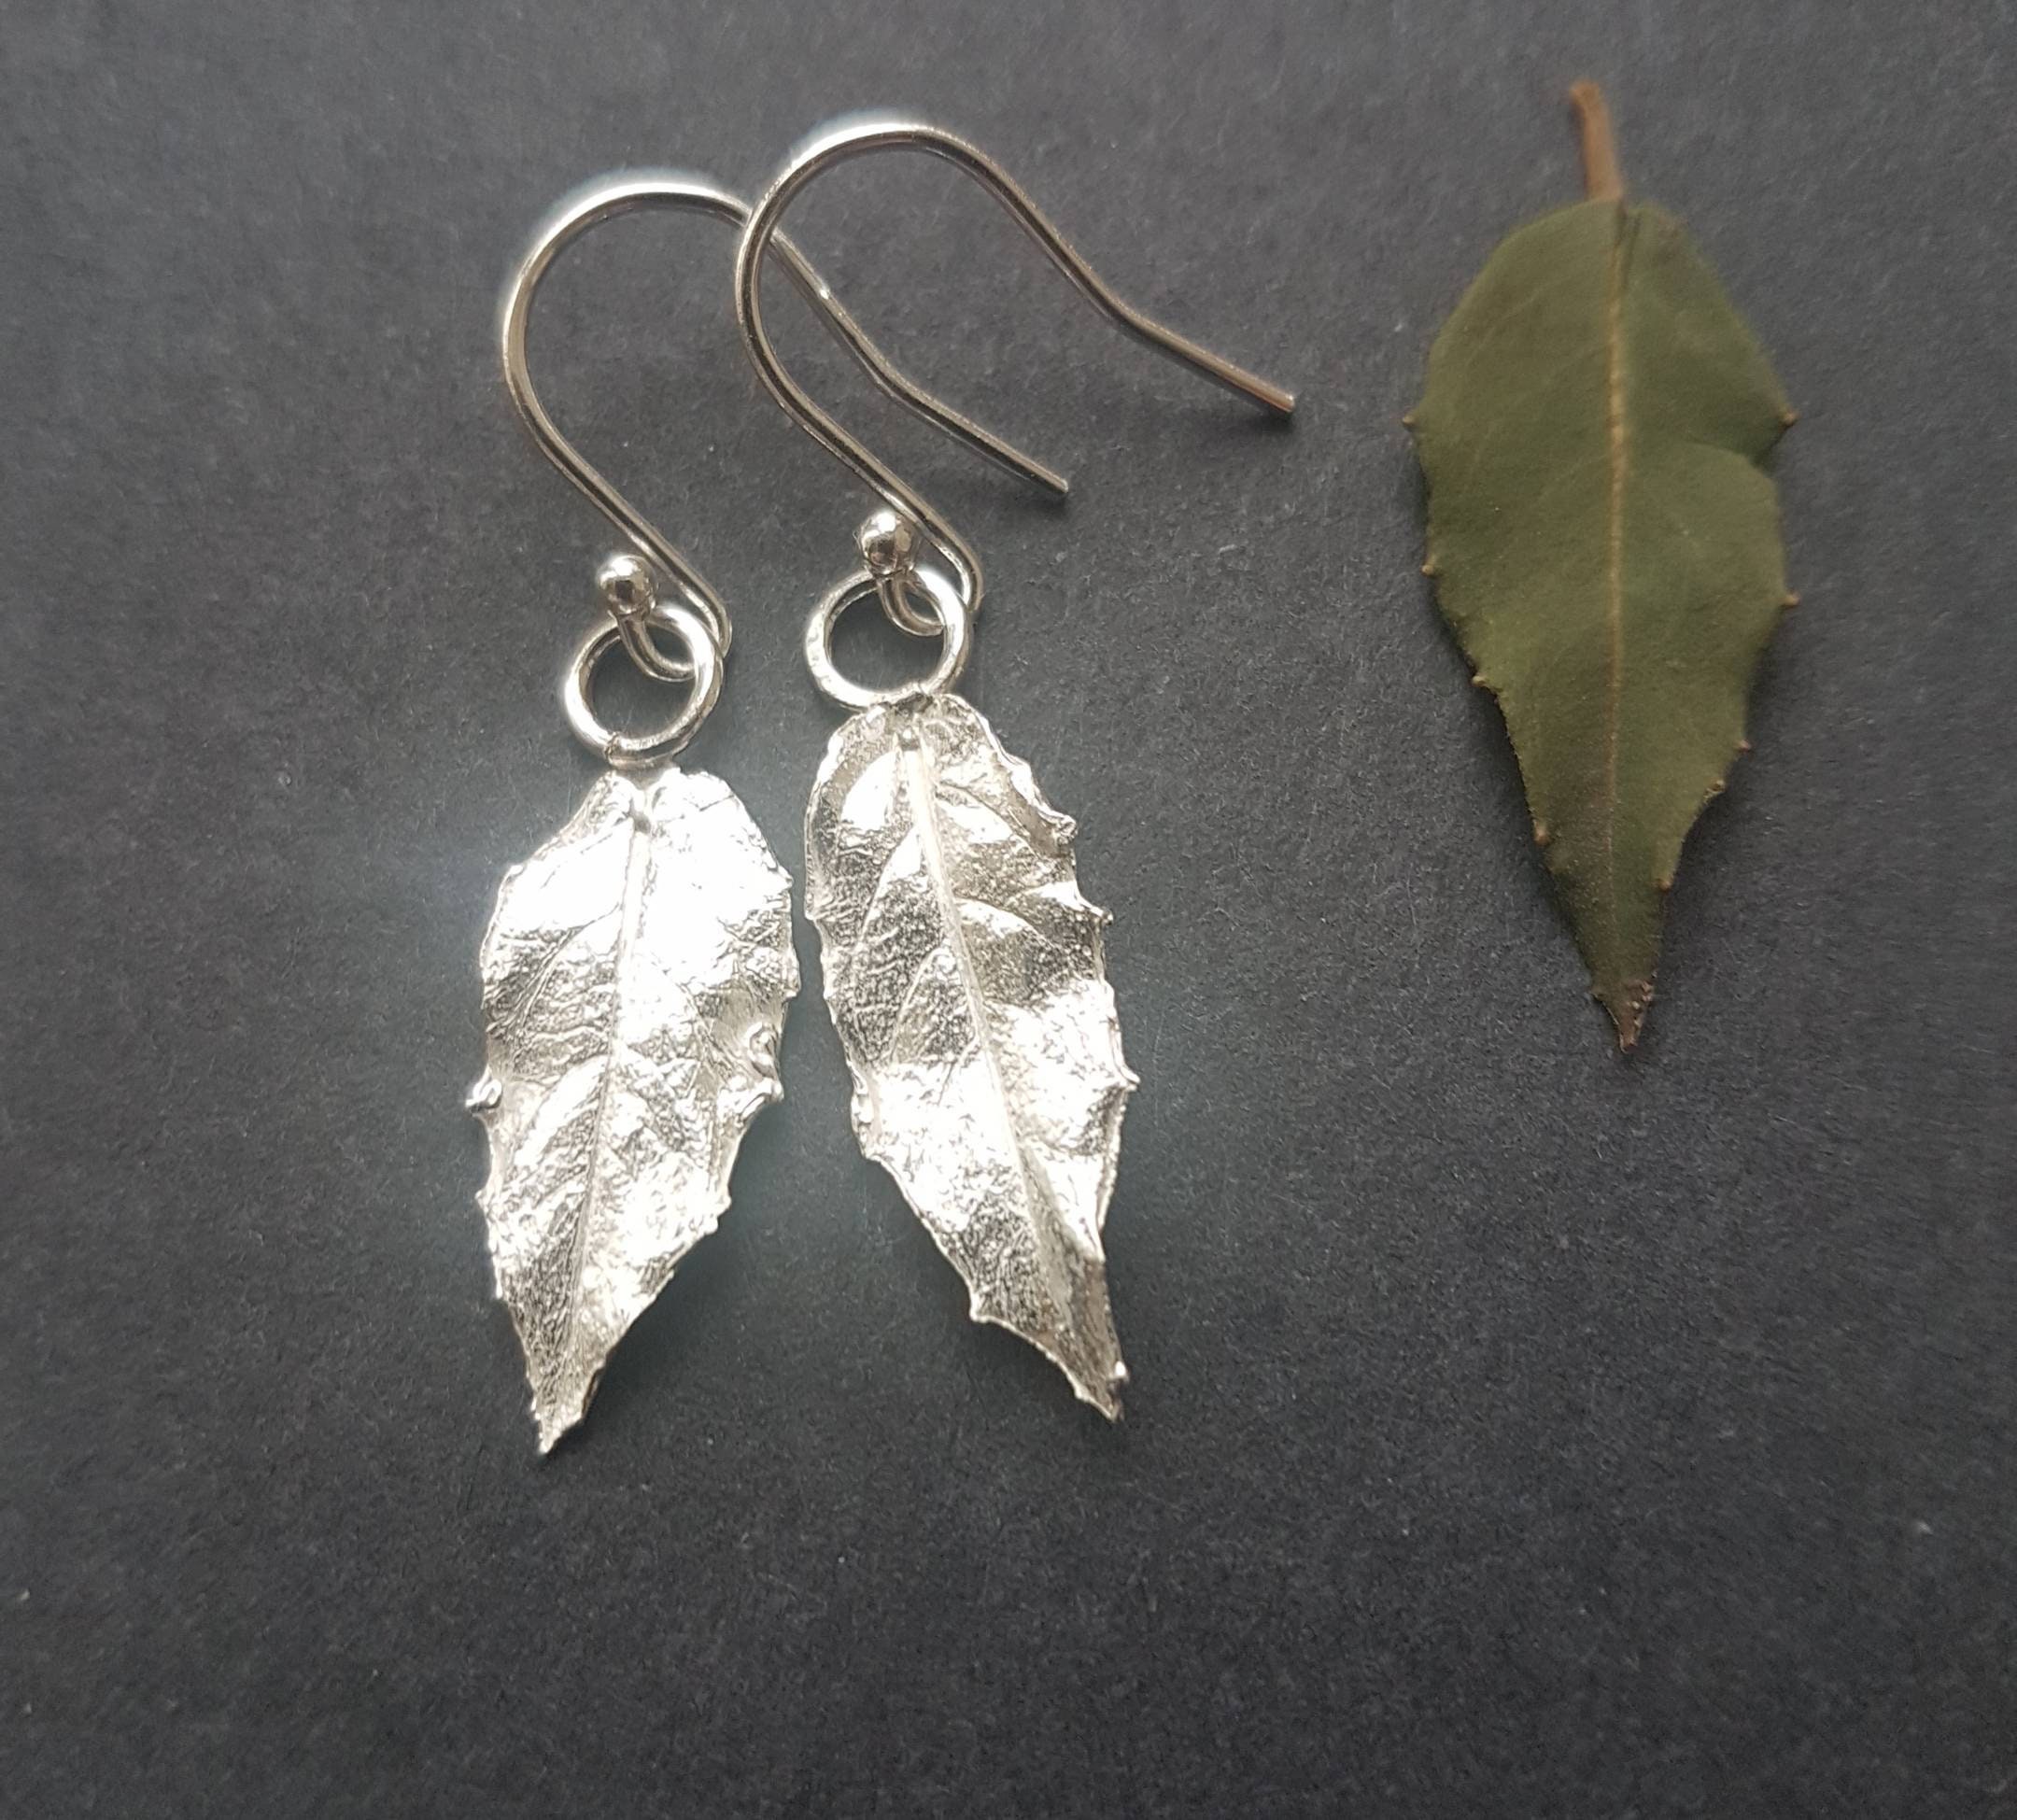 Silver Fuchsia Leaf Earrings, Real in Silver, Gift For Gardener Or Plant Lover, Handmade The Uk, Recycled Postal